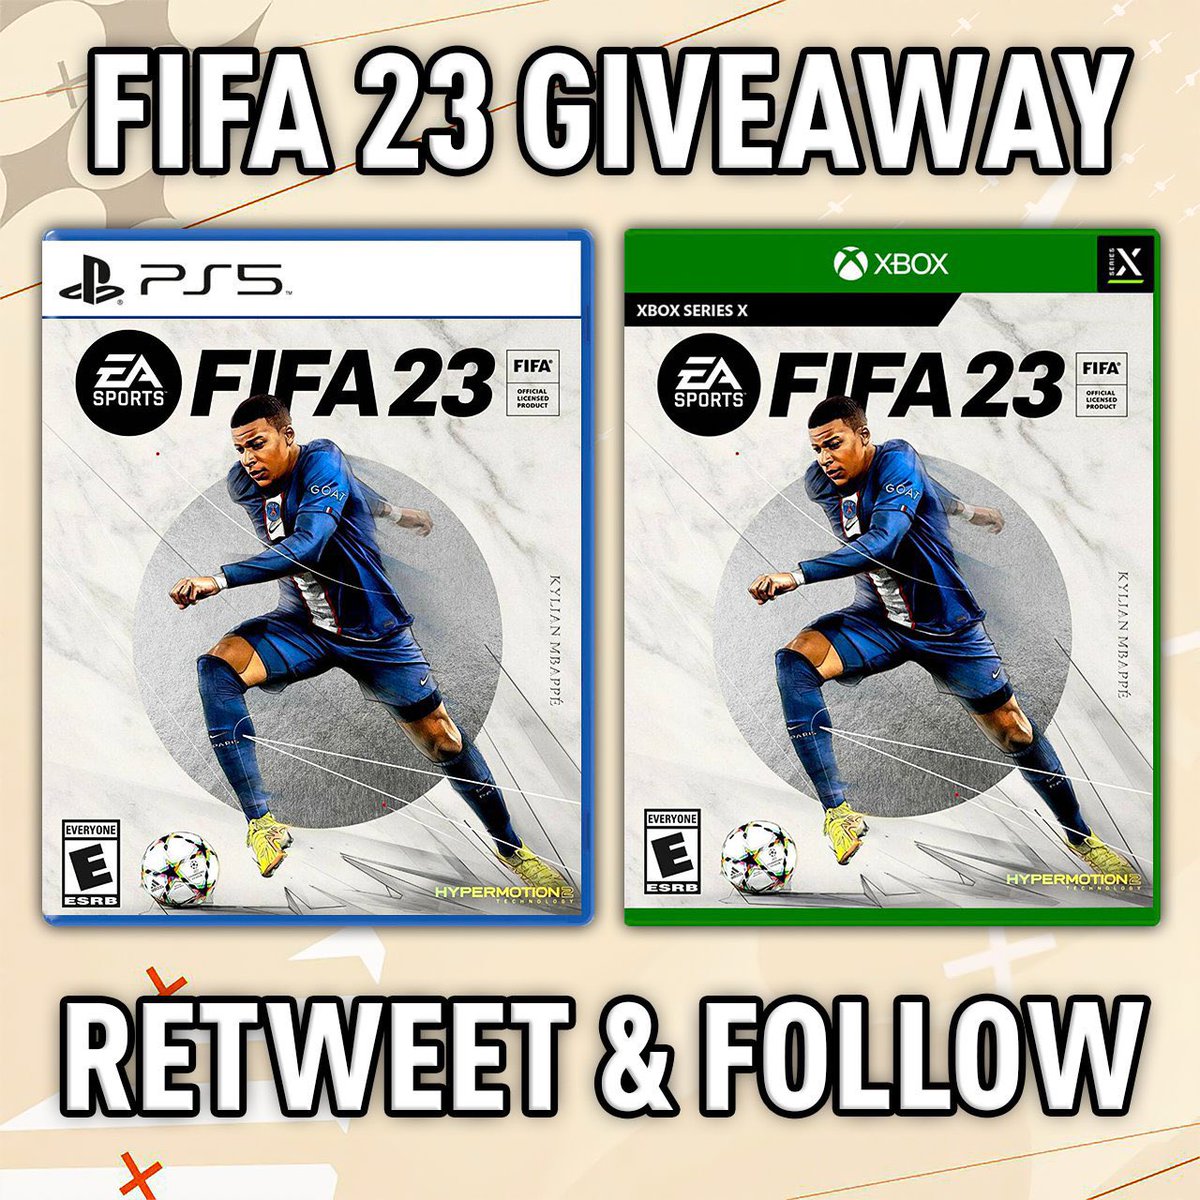 🚨 FIFA 23 GIVEAWAY! Get #FIFA23 for free! ✅ To join: - Retweet 🔄 - Follow me + @DominateFut + @FutTraderJ + @NealGuides ✅ Ends soon!